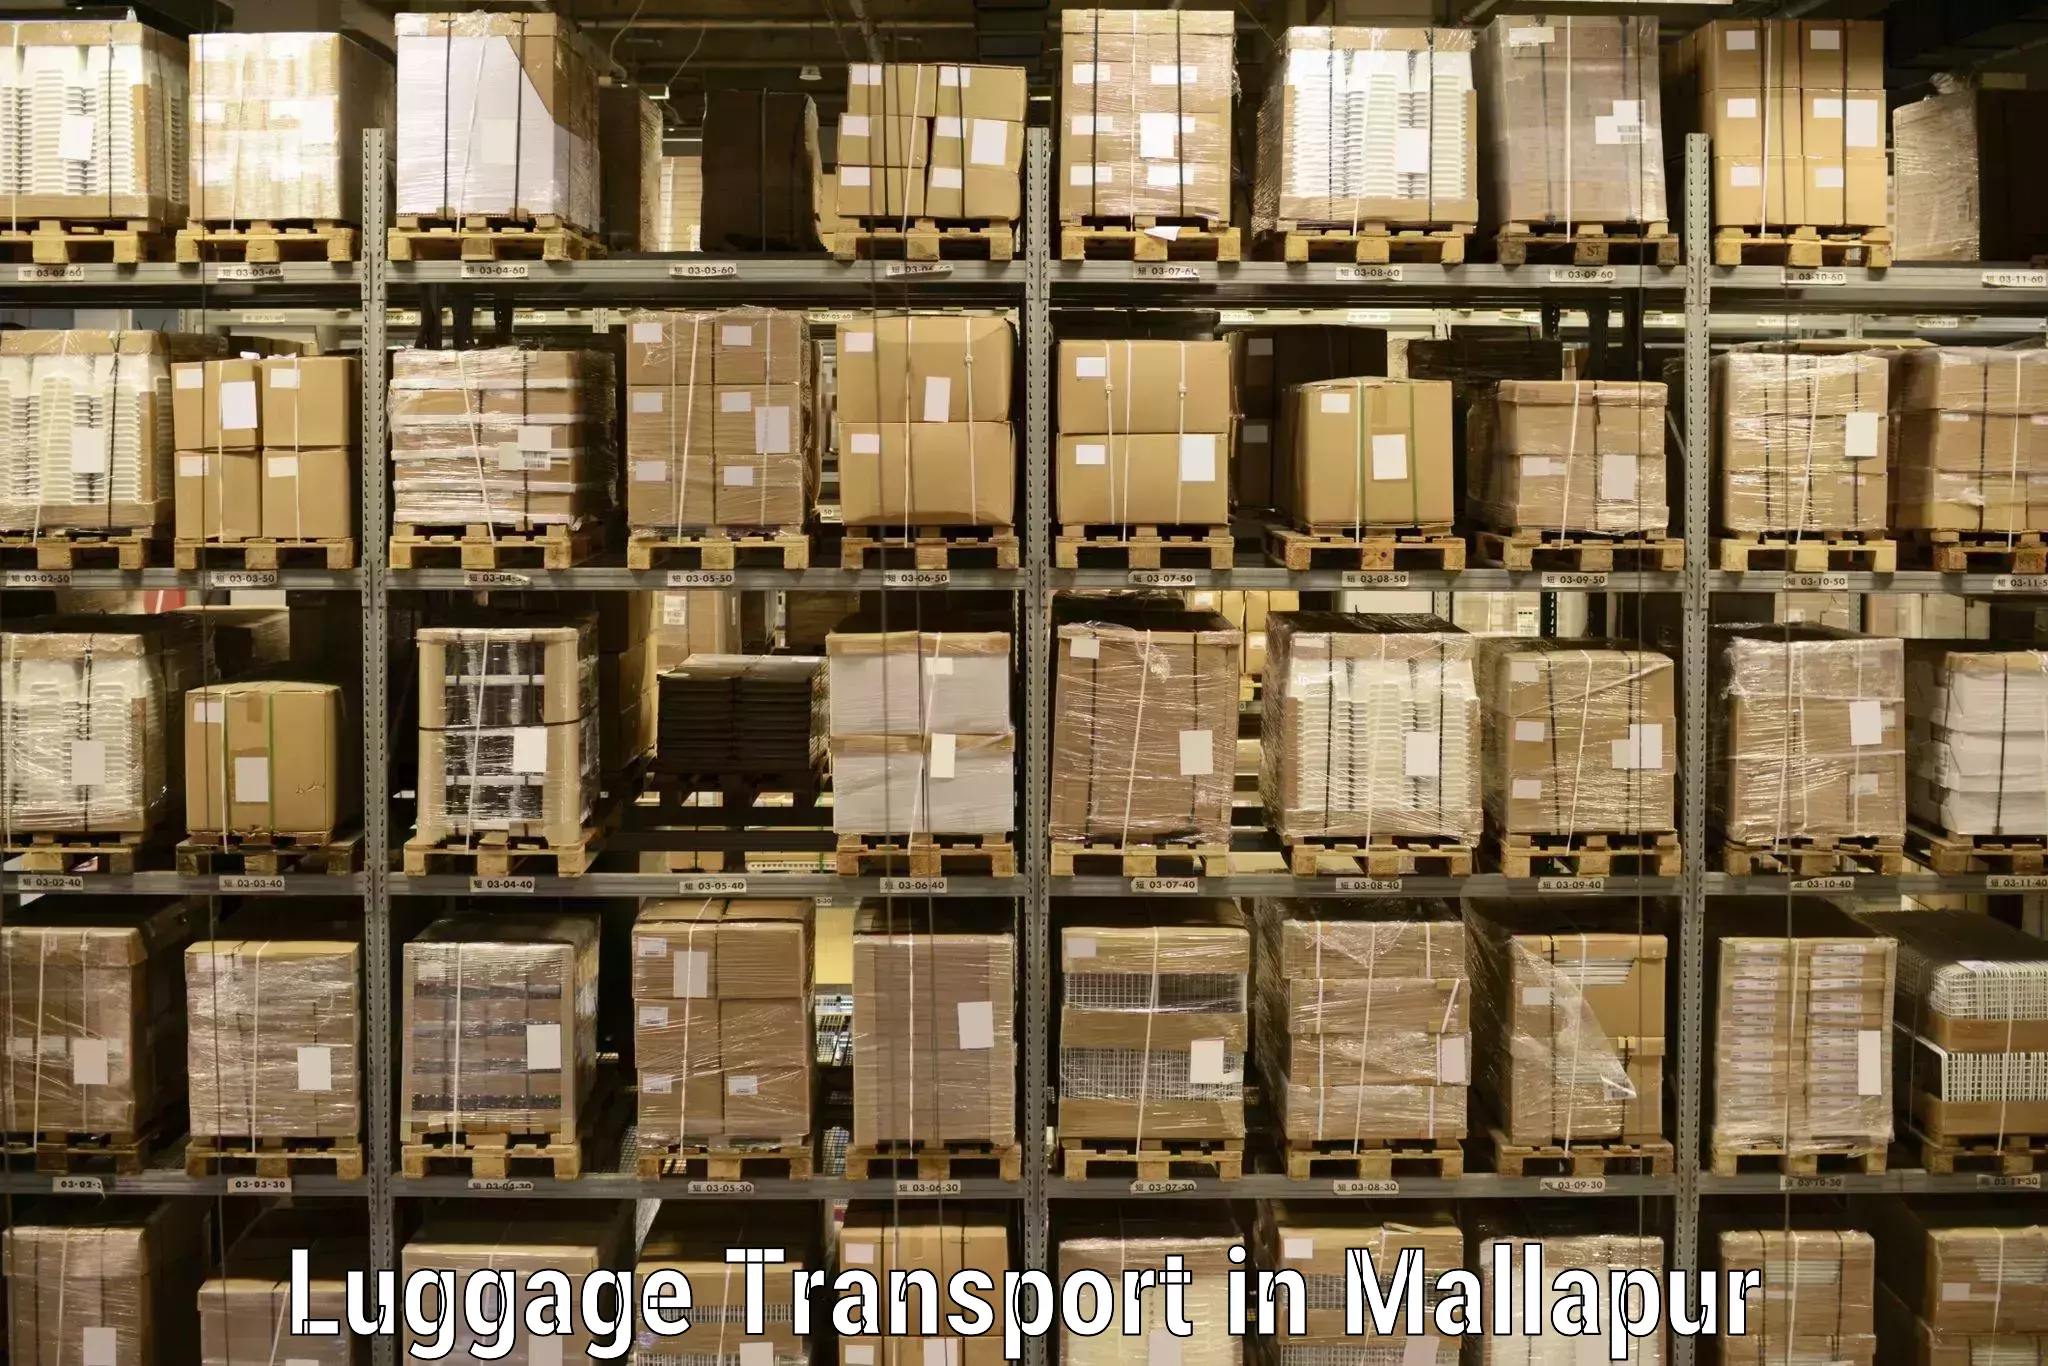 Luggage transport operations in Mallapur